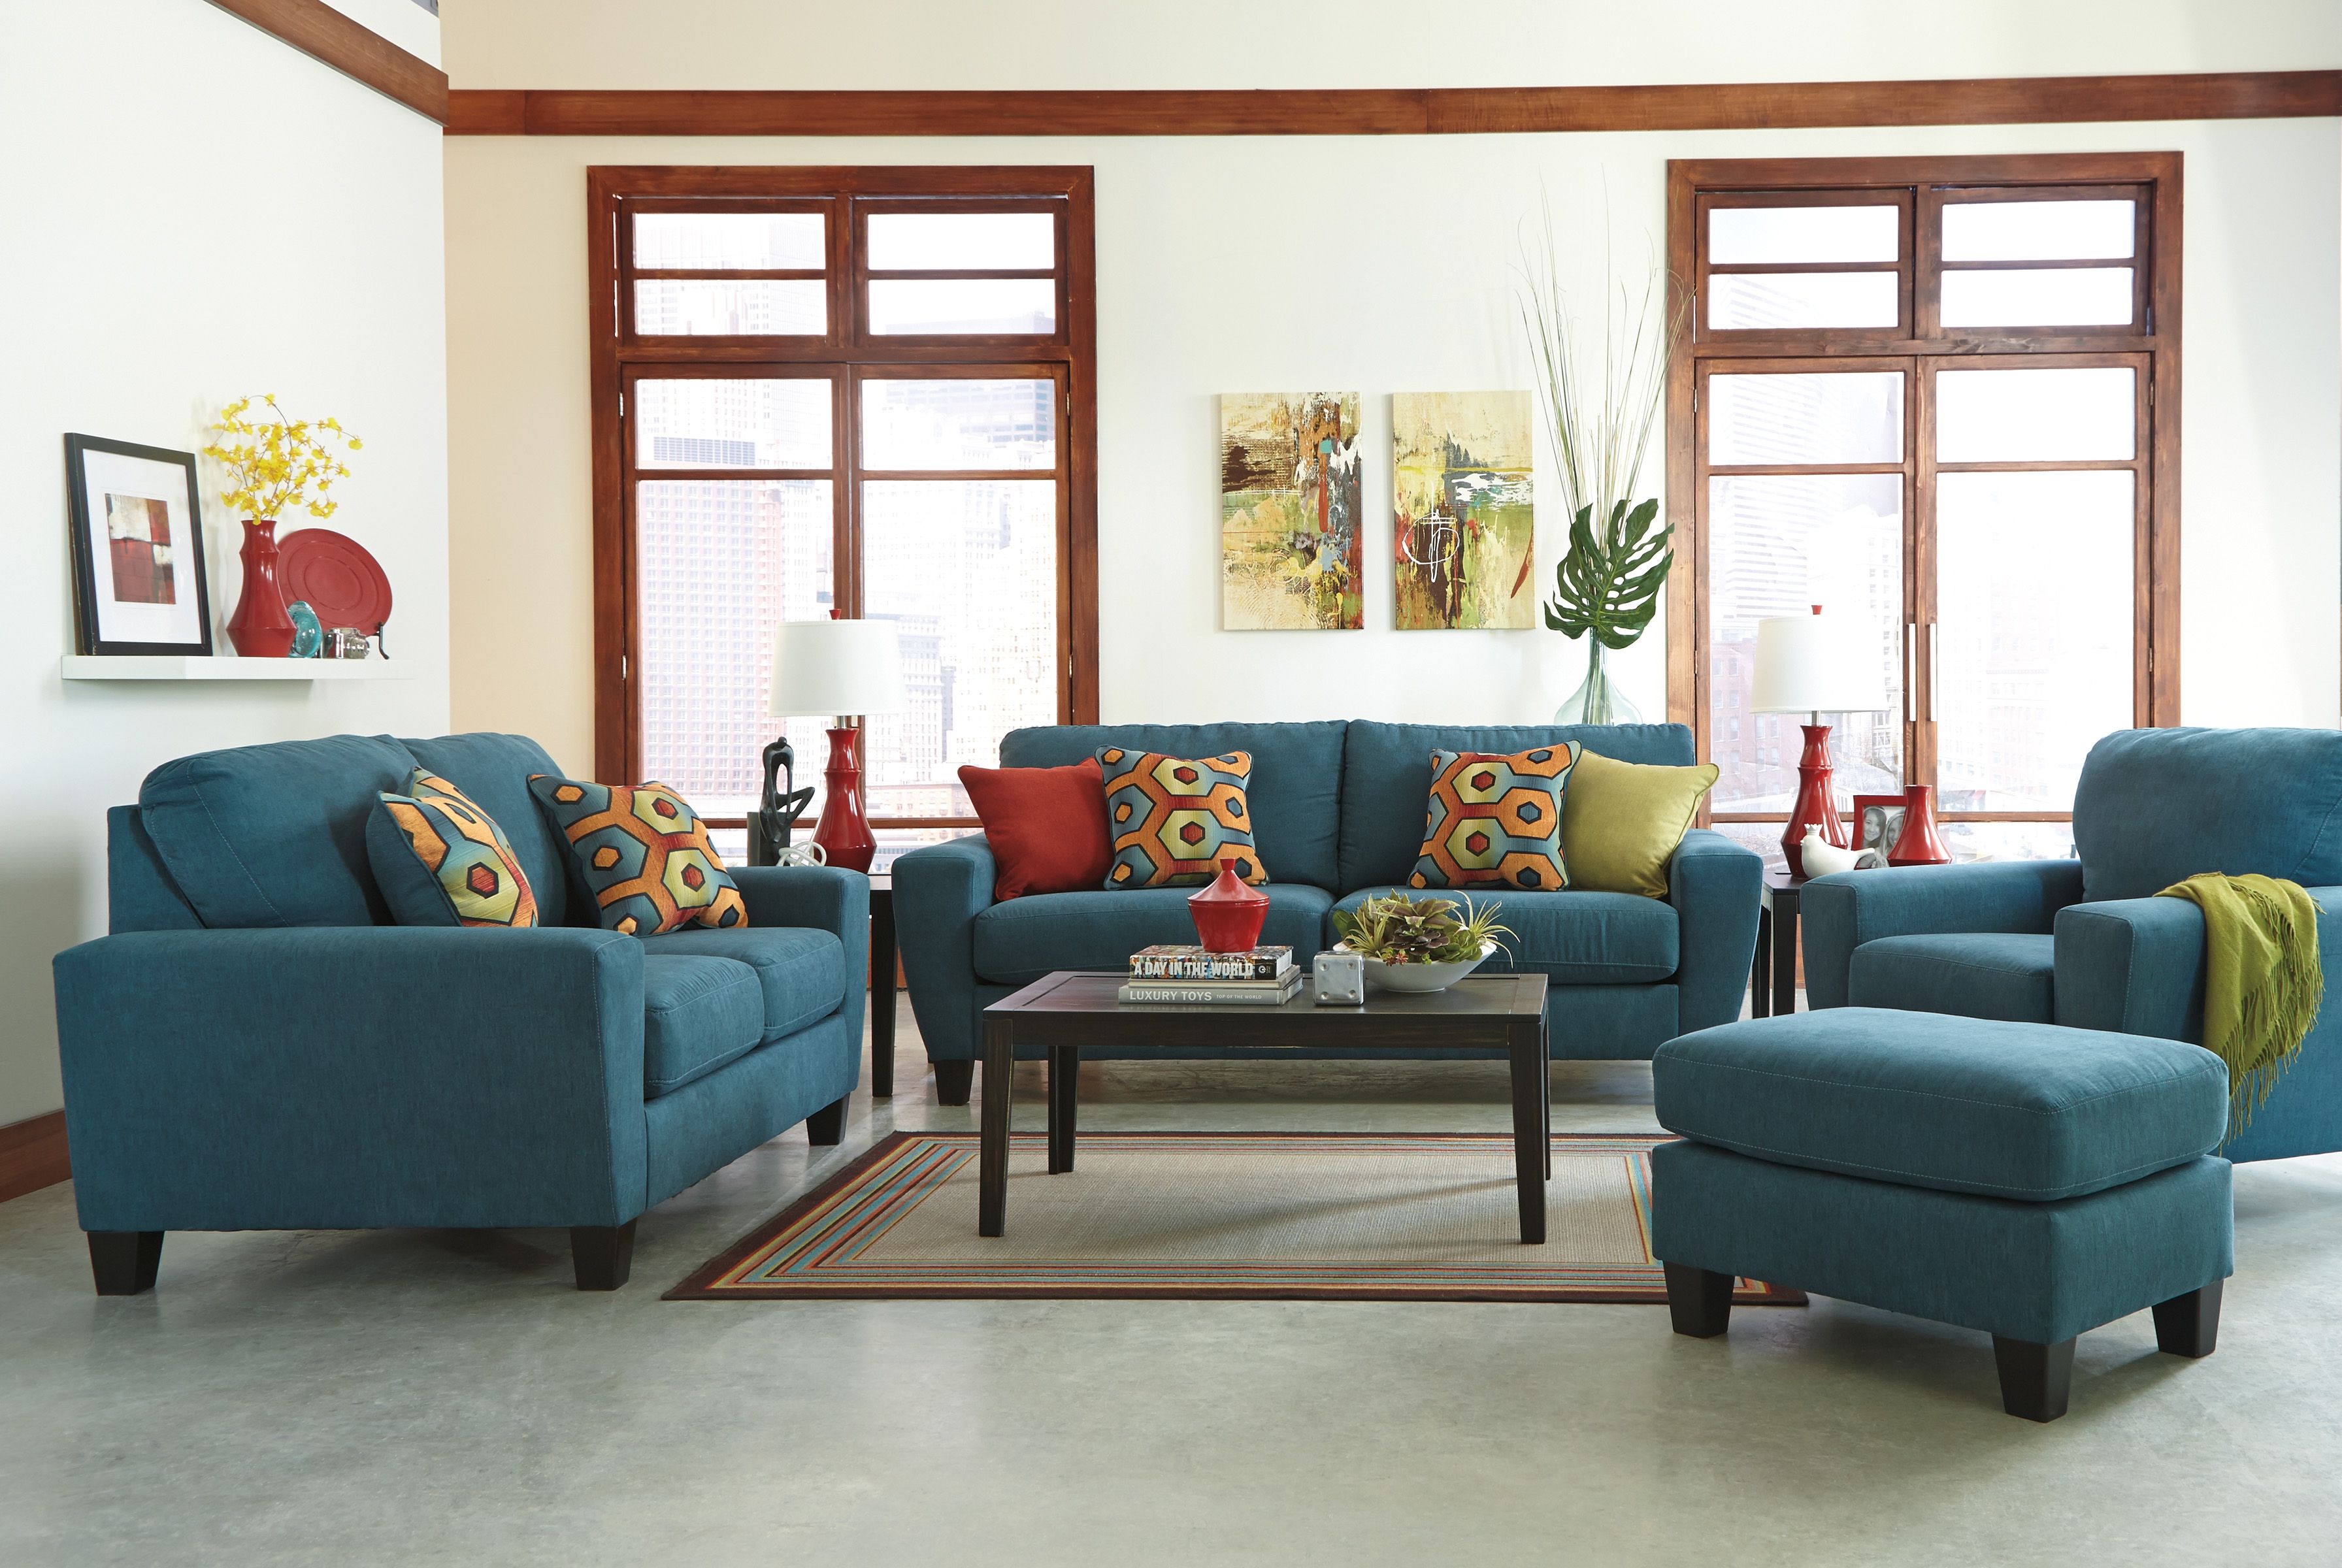 Sofa Loveseat And Chair Set Best Sofas Ideas Sofascouch Within Sofa Loveseat And Chair Set (View 7 of 15)